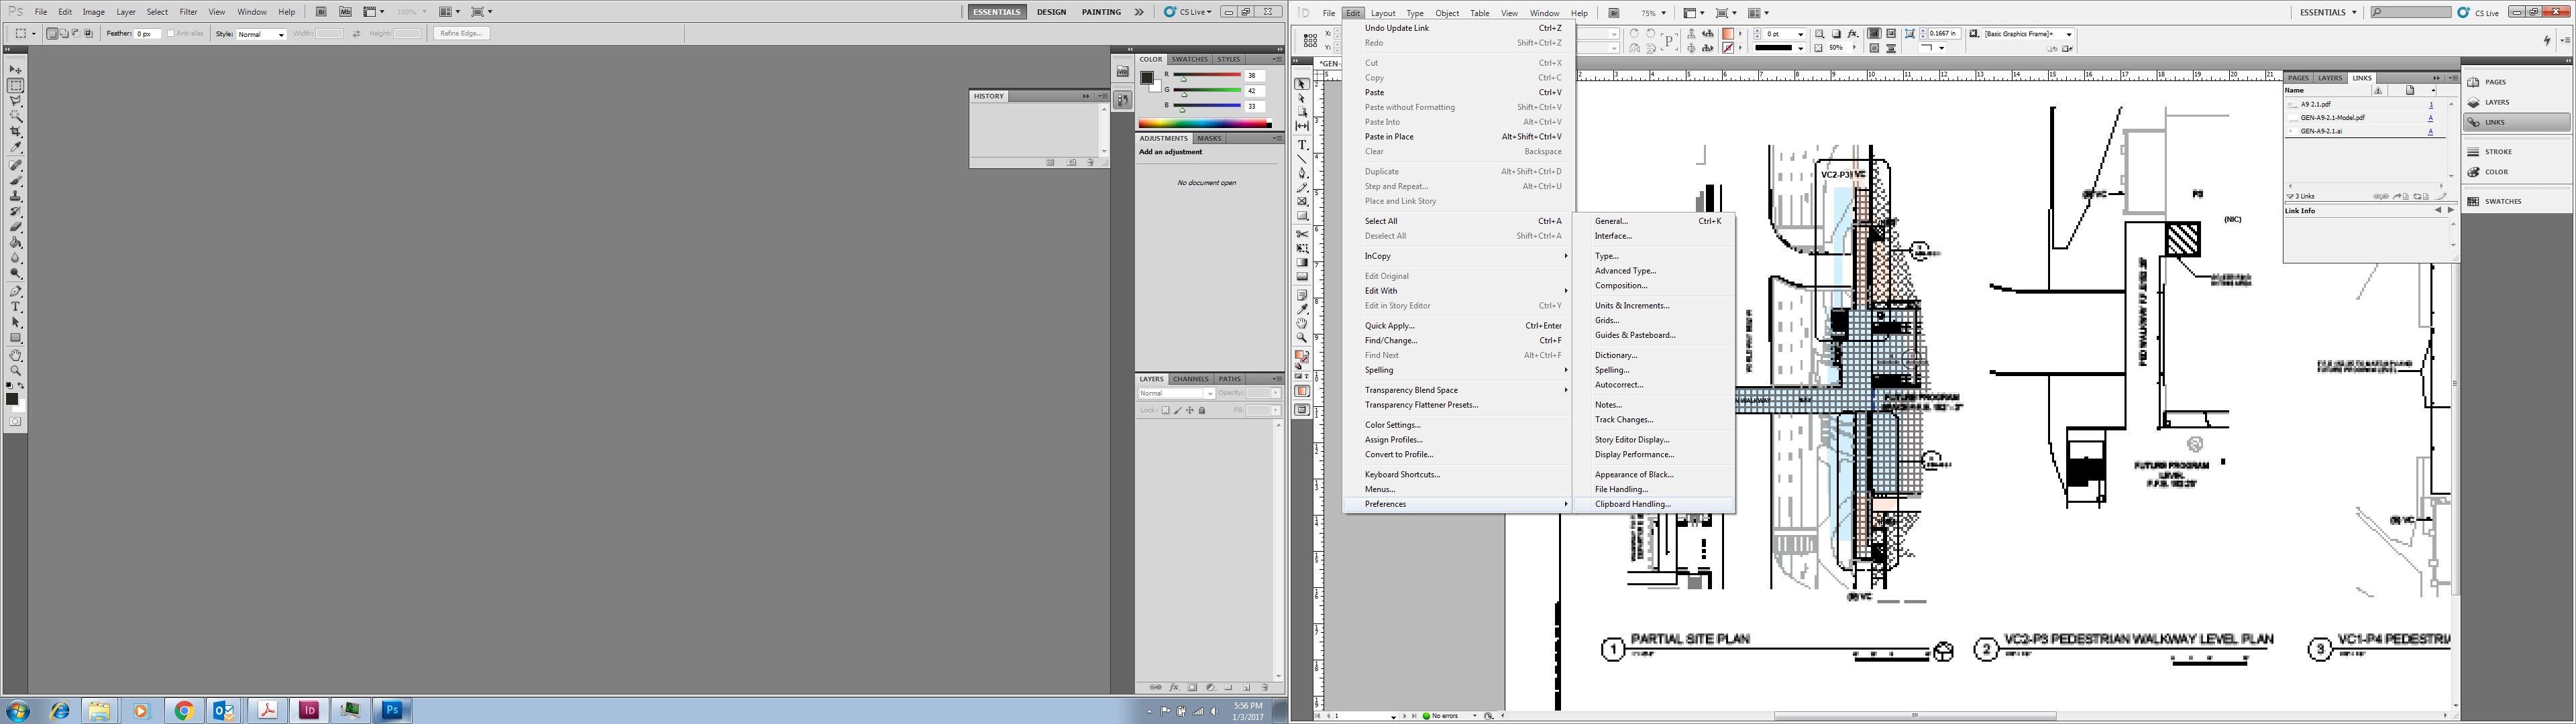 copy object adobe illustrator with effect to indesign